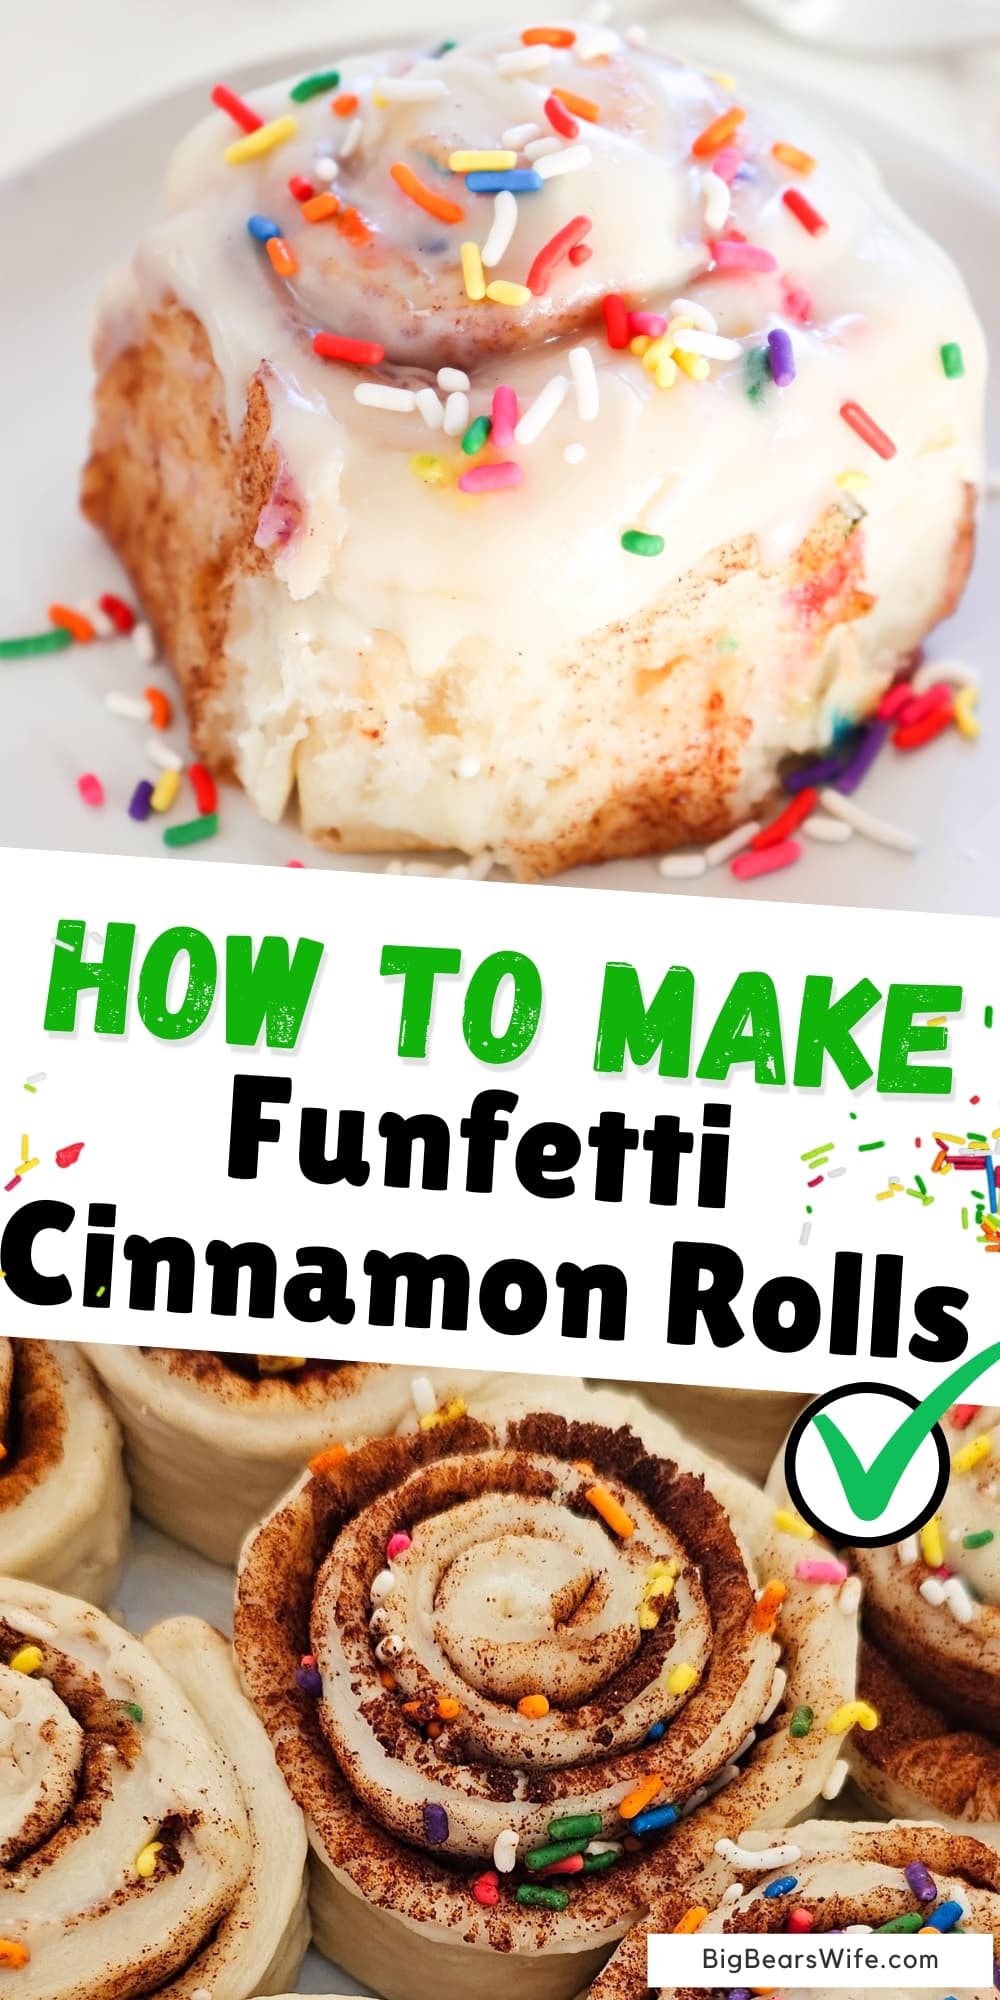 Indulge your sweet tooth and transport yourself back to carefree childhood days with these irresistible Funfetti Cinnamon Rolls. Bursting with colorful sprinkles and a cinnamon-sugar swirl, this unique twist on a classic treat is sure to bring joy and nostalgia to your breakfast table. via @bigbearswife